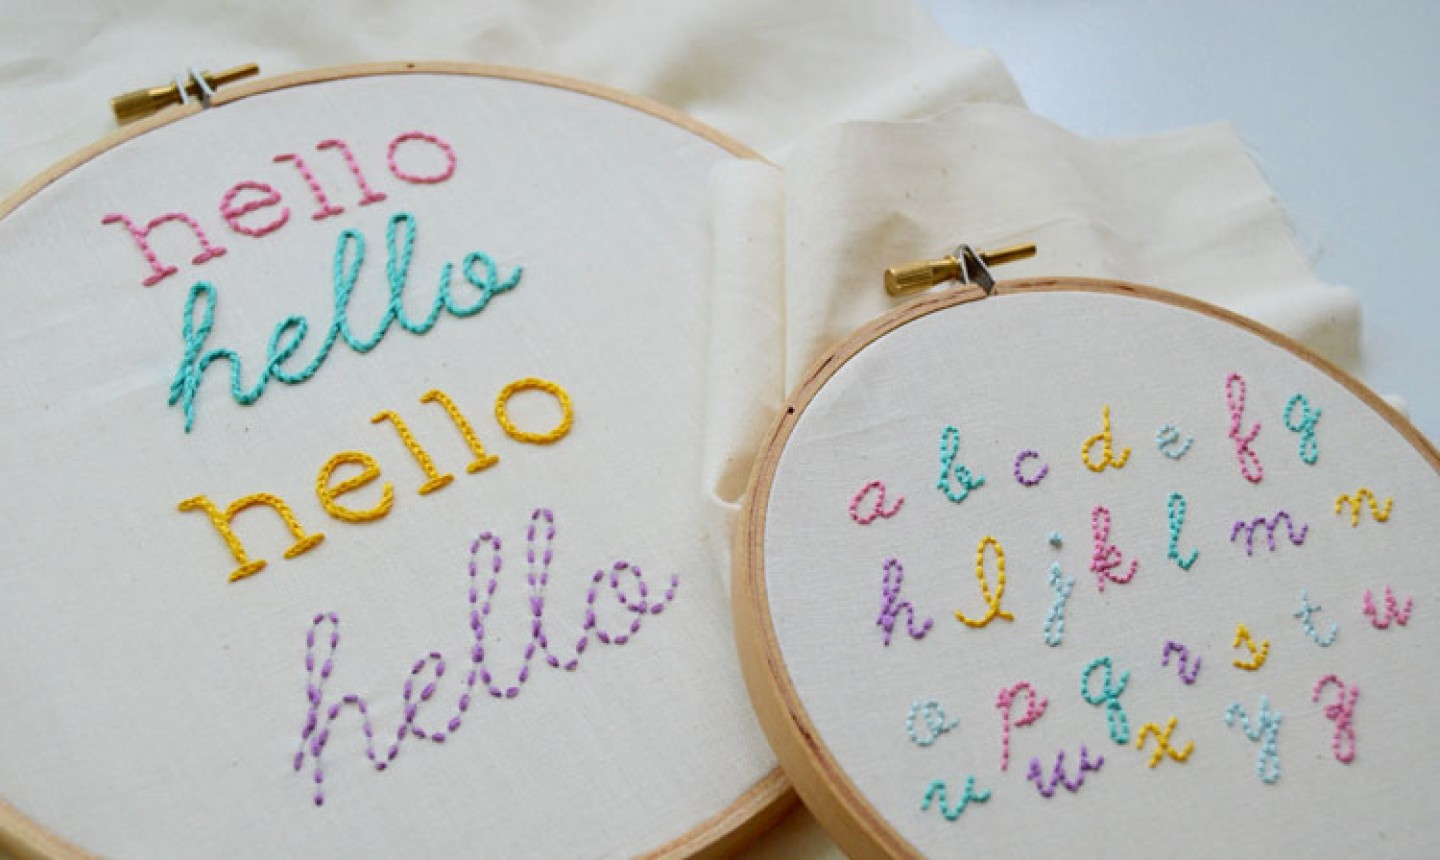 Embroidery Alphabet Patterns 4 Surprisingly Easy Stitches For Perfect Hand Embroidered Letters